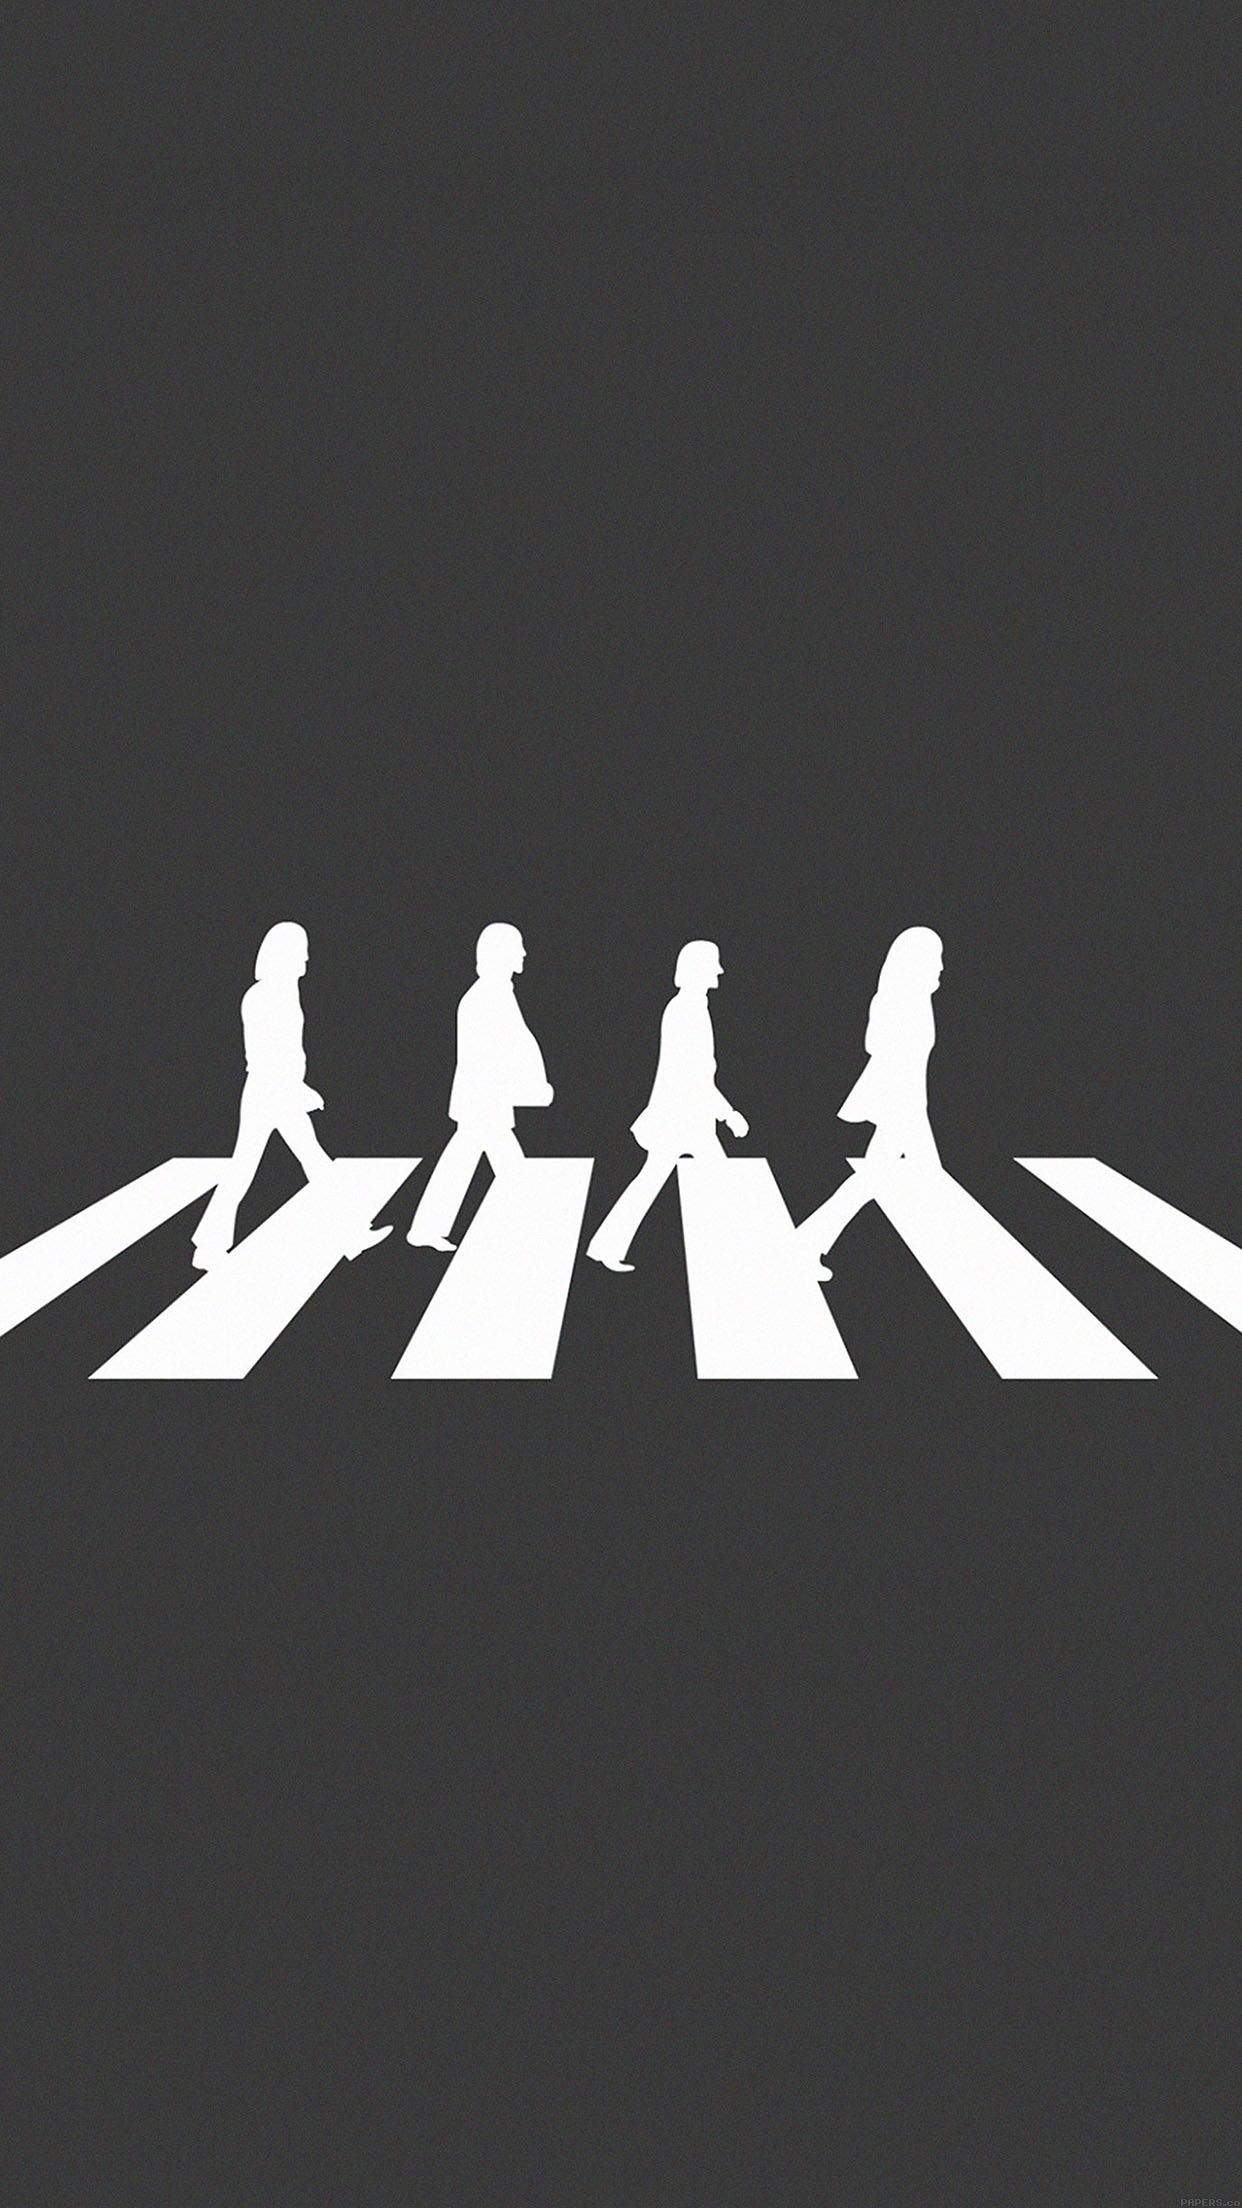 iPhoneXpapers abbey road music art